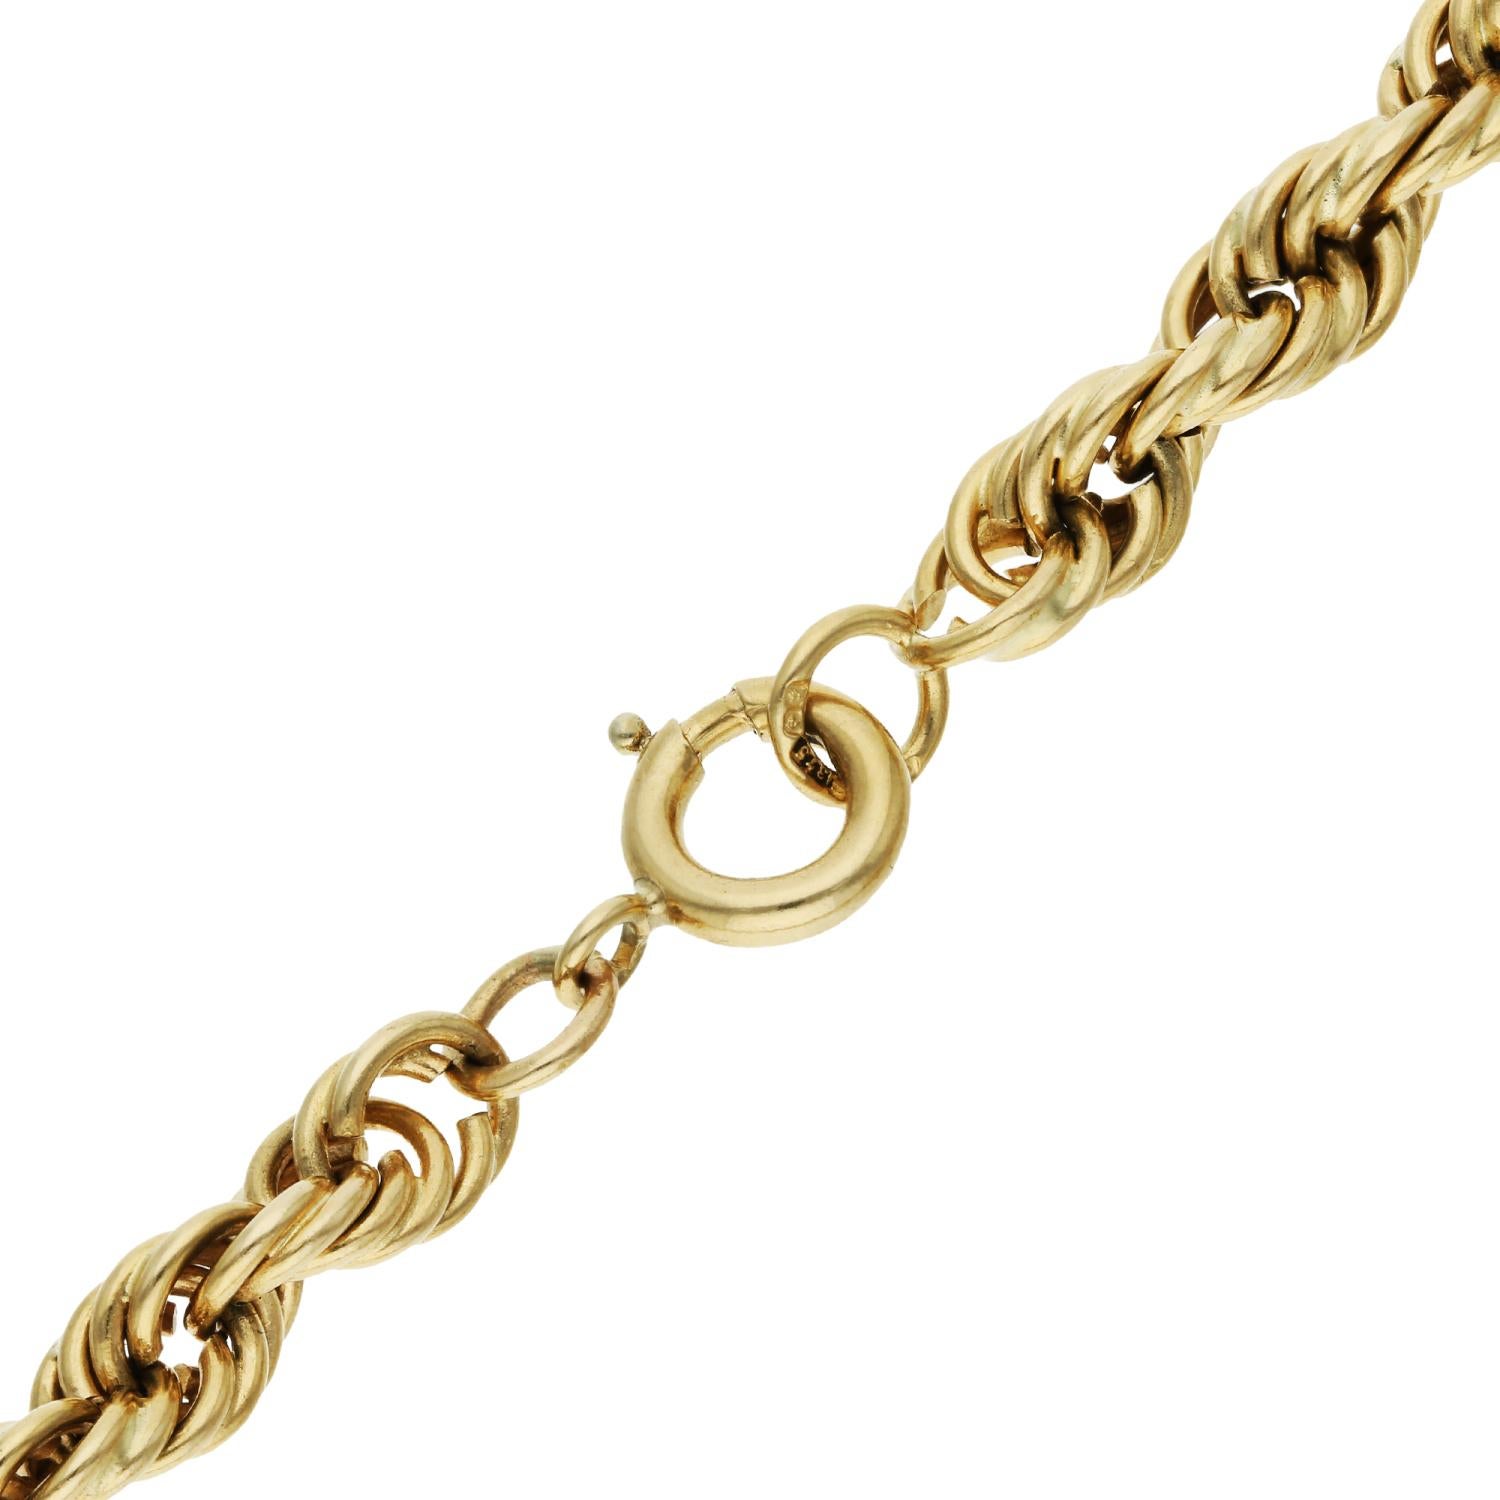  Solid 9ct Yellow Gold 28